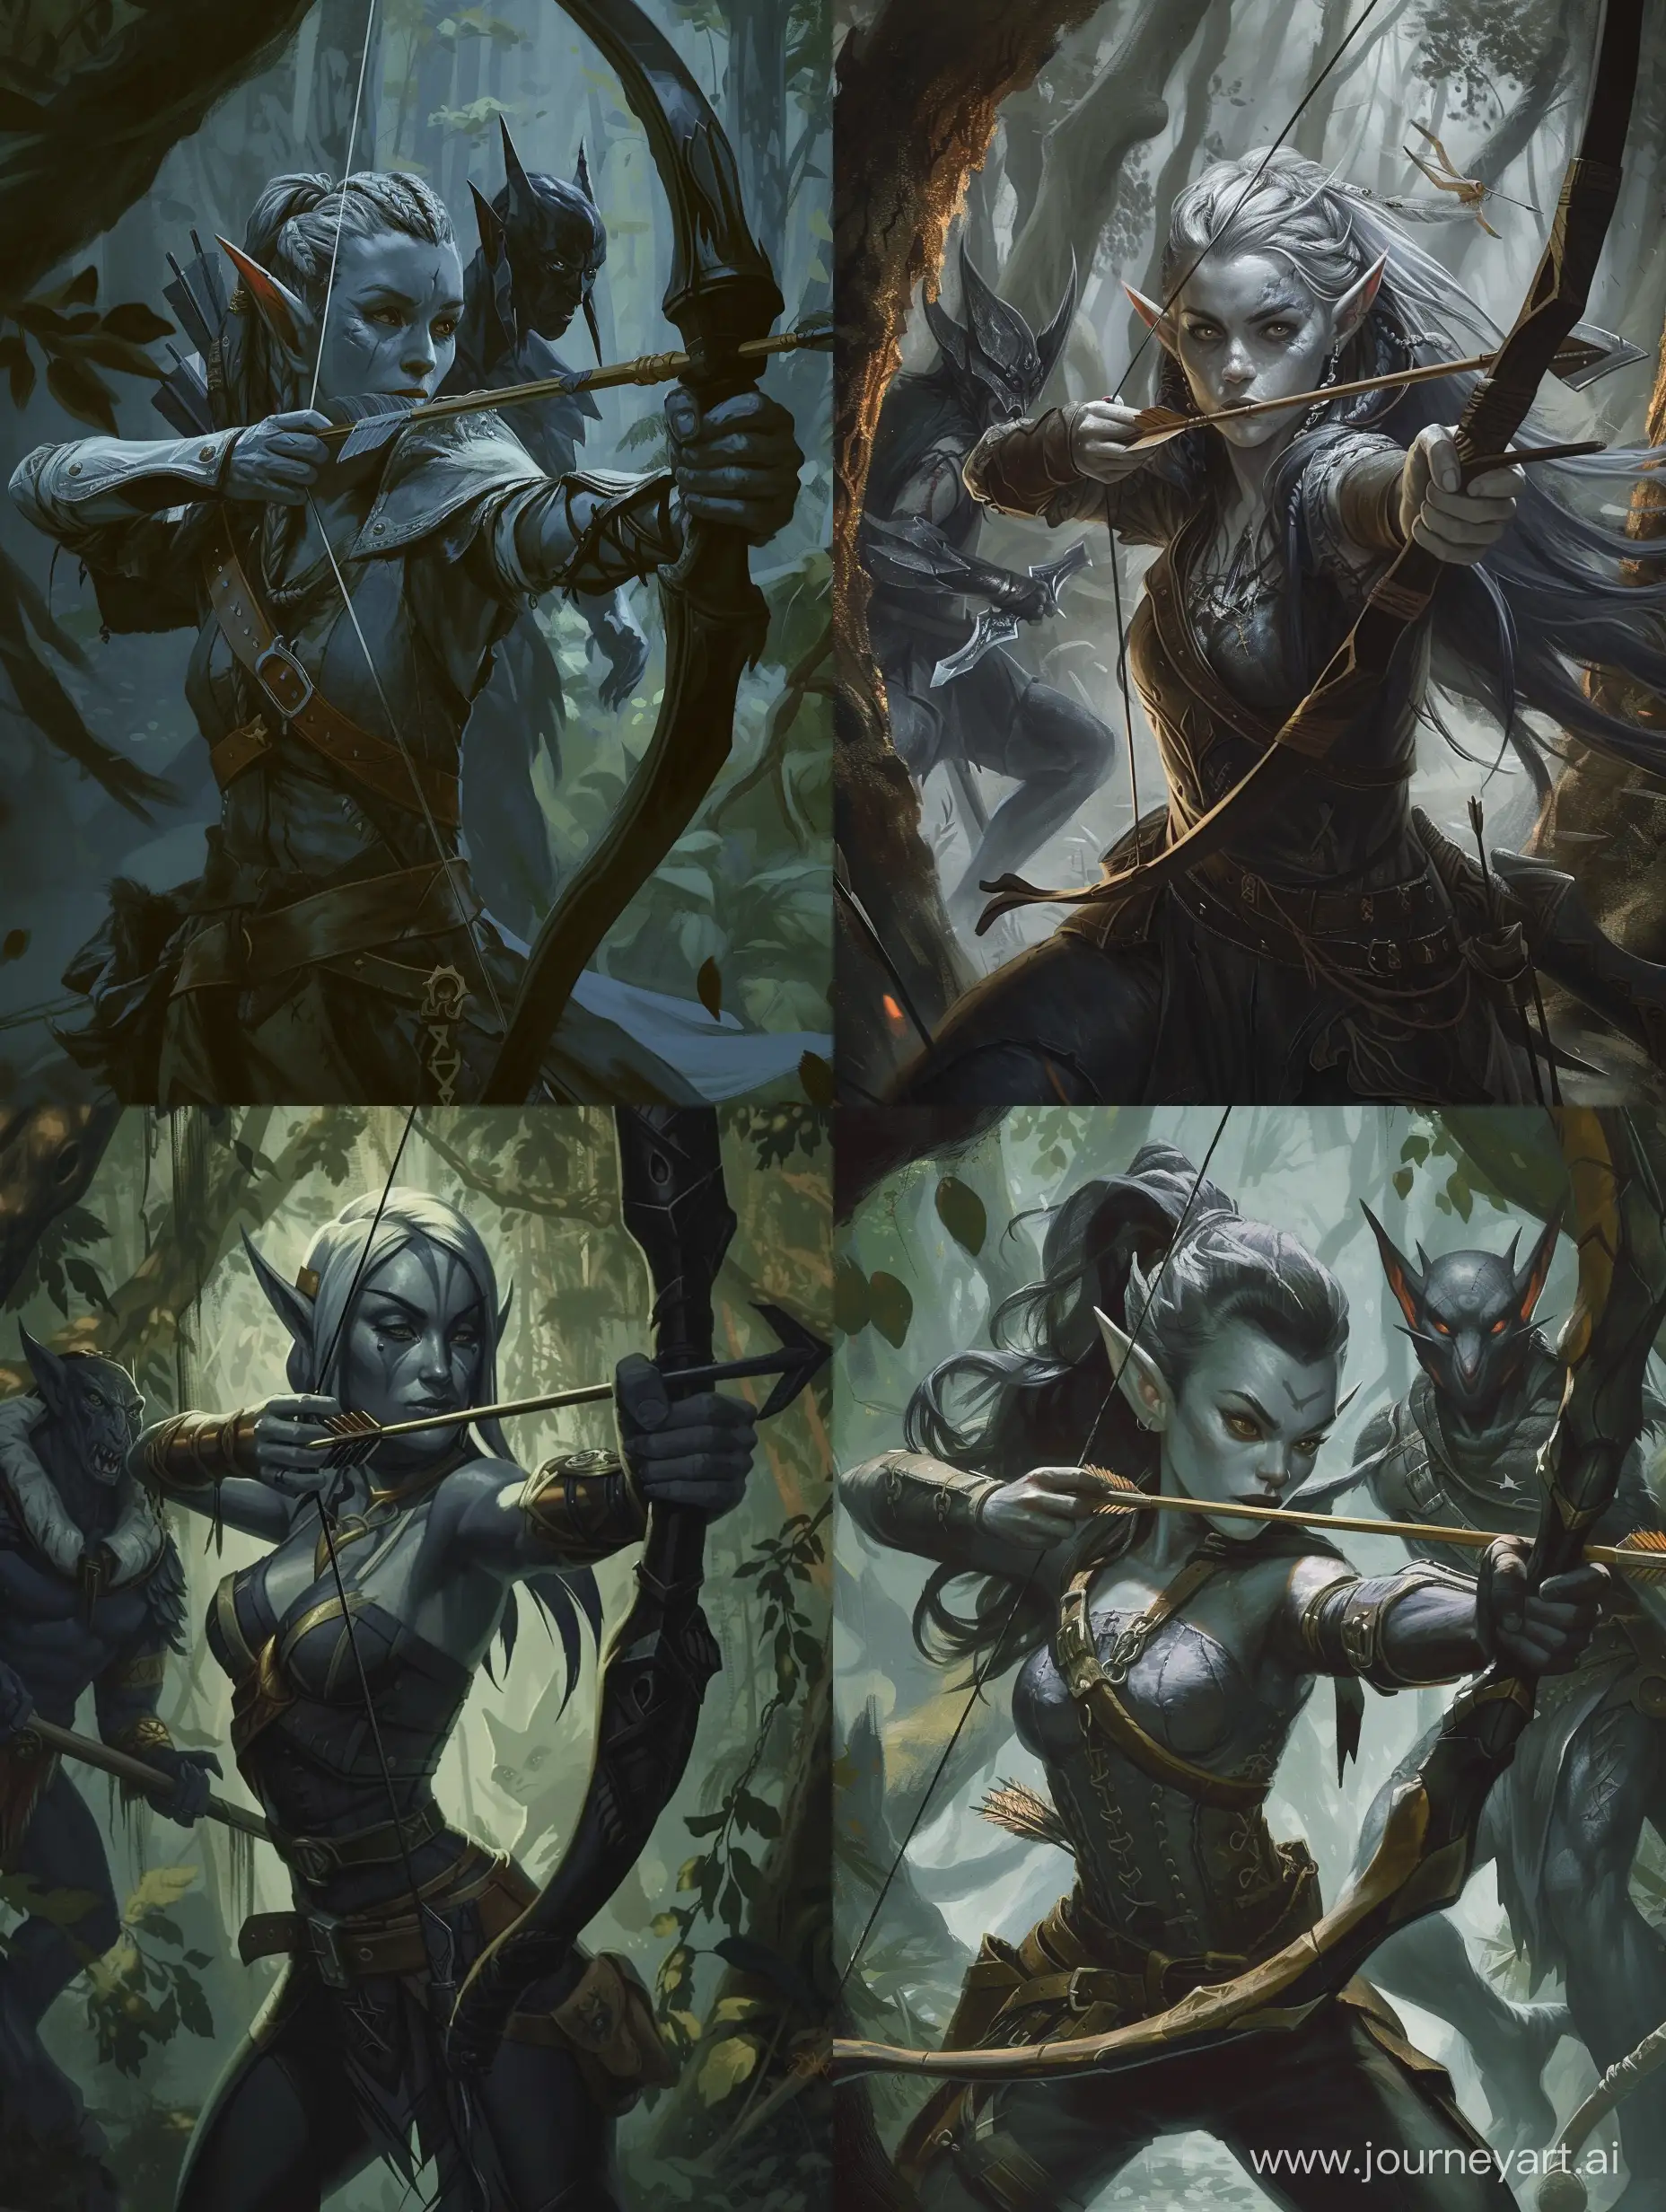 the painting is made in the anime style of the 90s, the painting is made in anime style, the painting depicts a half-elf, a half-elf has a gray-black skin color, a half-elf holds a hunting bow in her hands, a half-elf has a dagger in a sheath on her belt, a half-elf is in a dark forest, near a half-elf is a supreme dark elf with a saber.